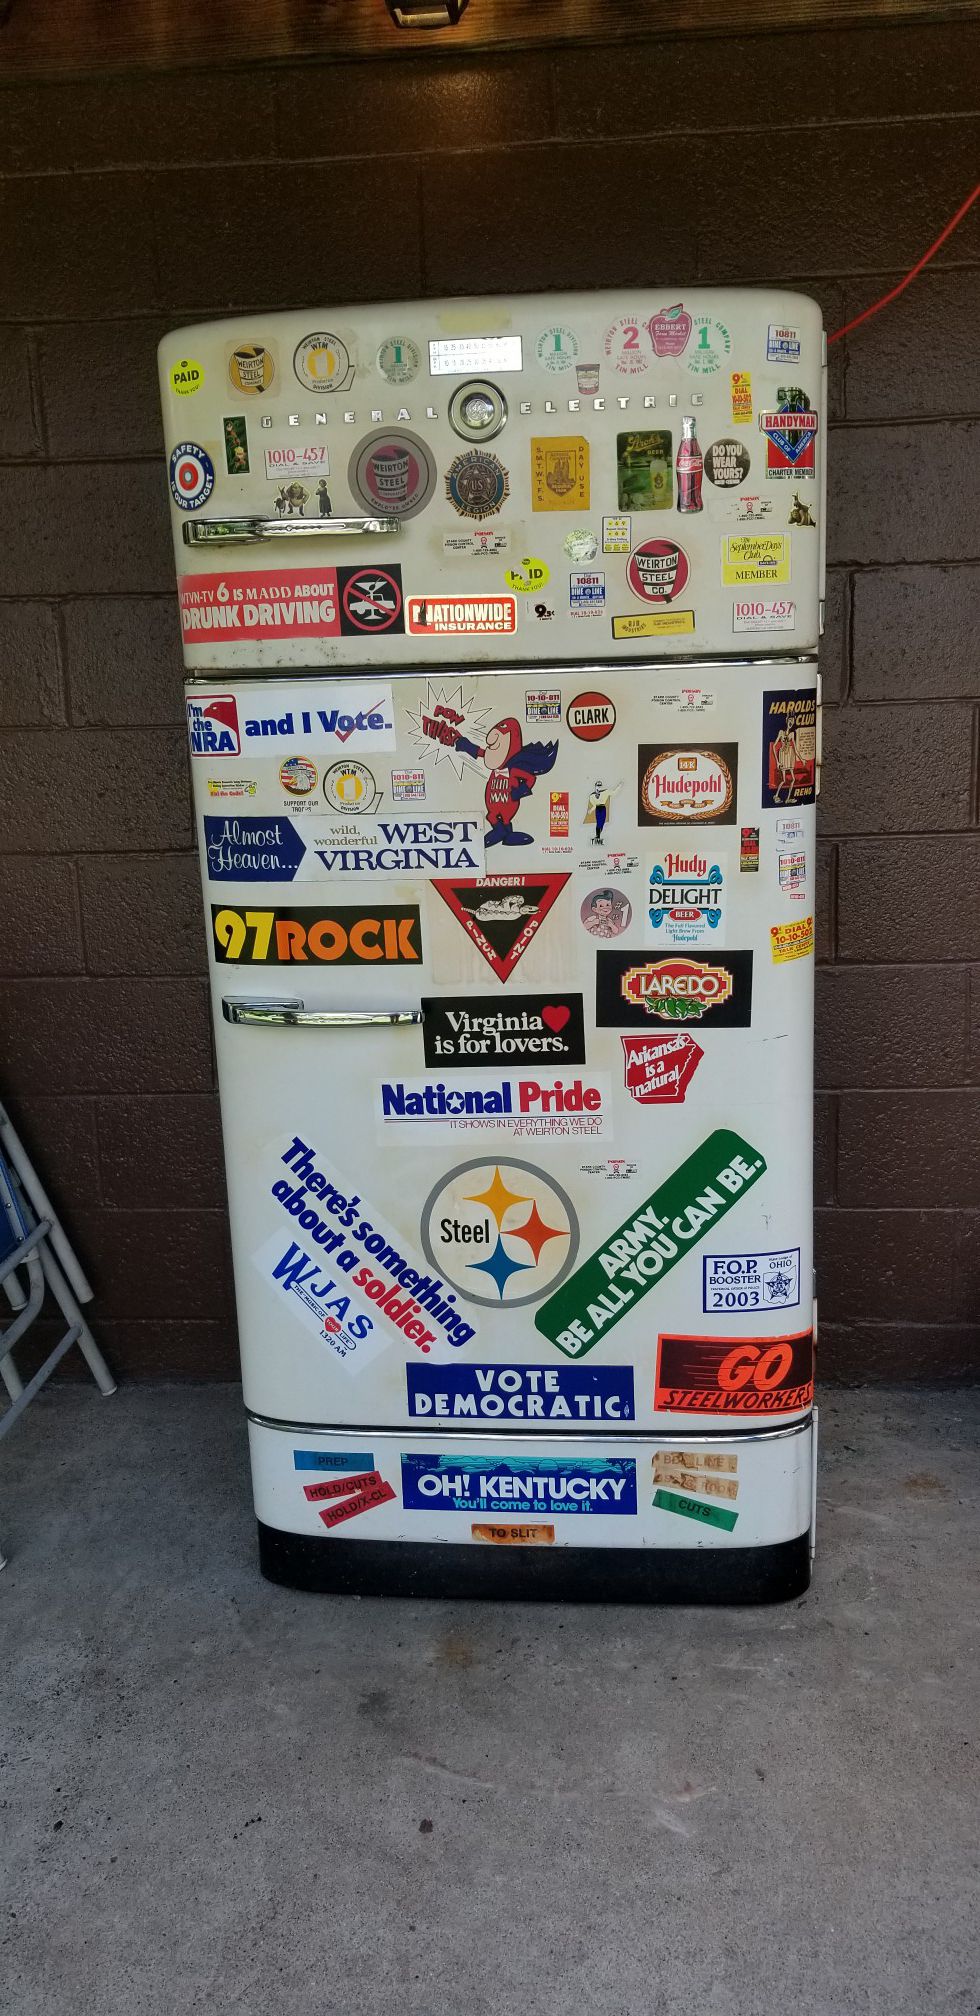 GE refrigerator. Circa 1950's. Still runs good. Would be a good project to refurbish for fans of retro decor.